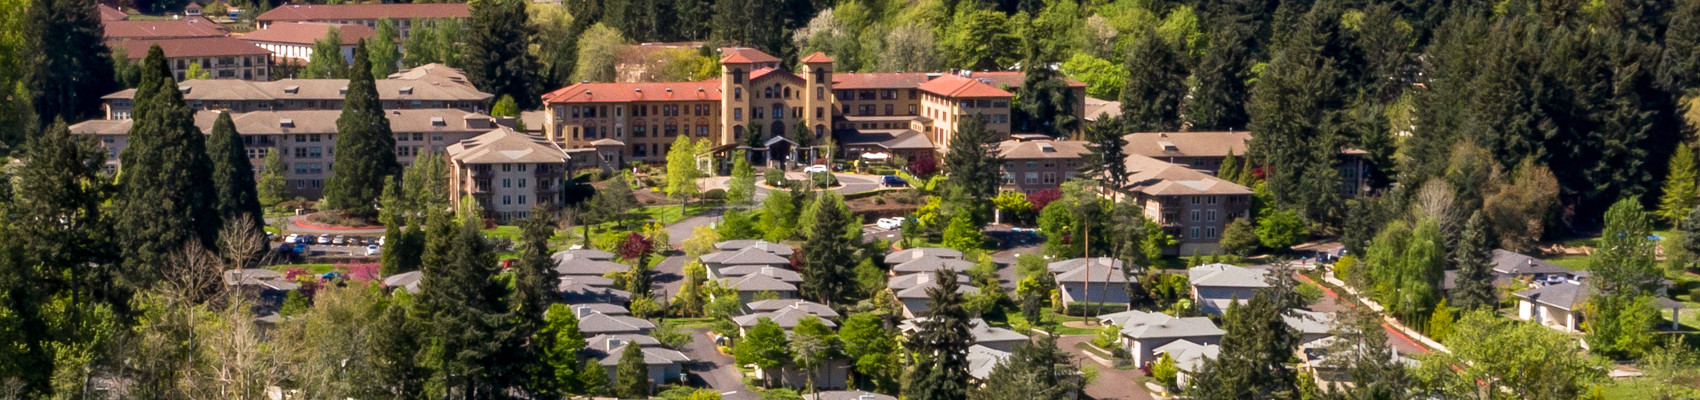 Aerial view of Mary s Woods senior living community